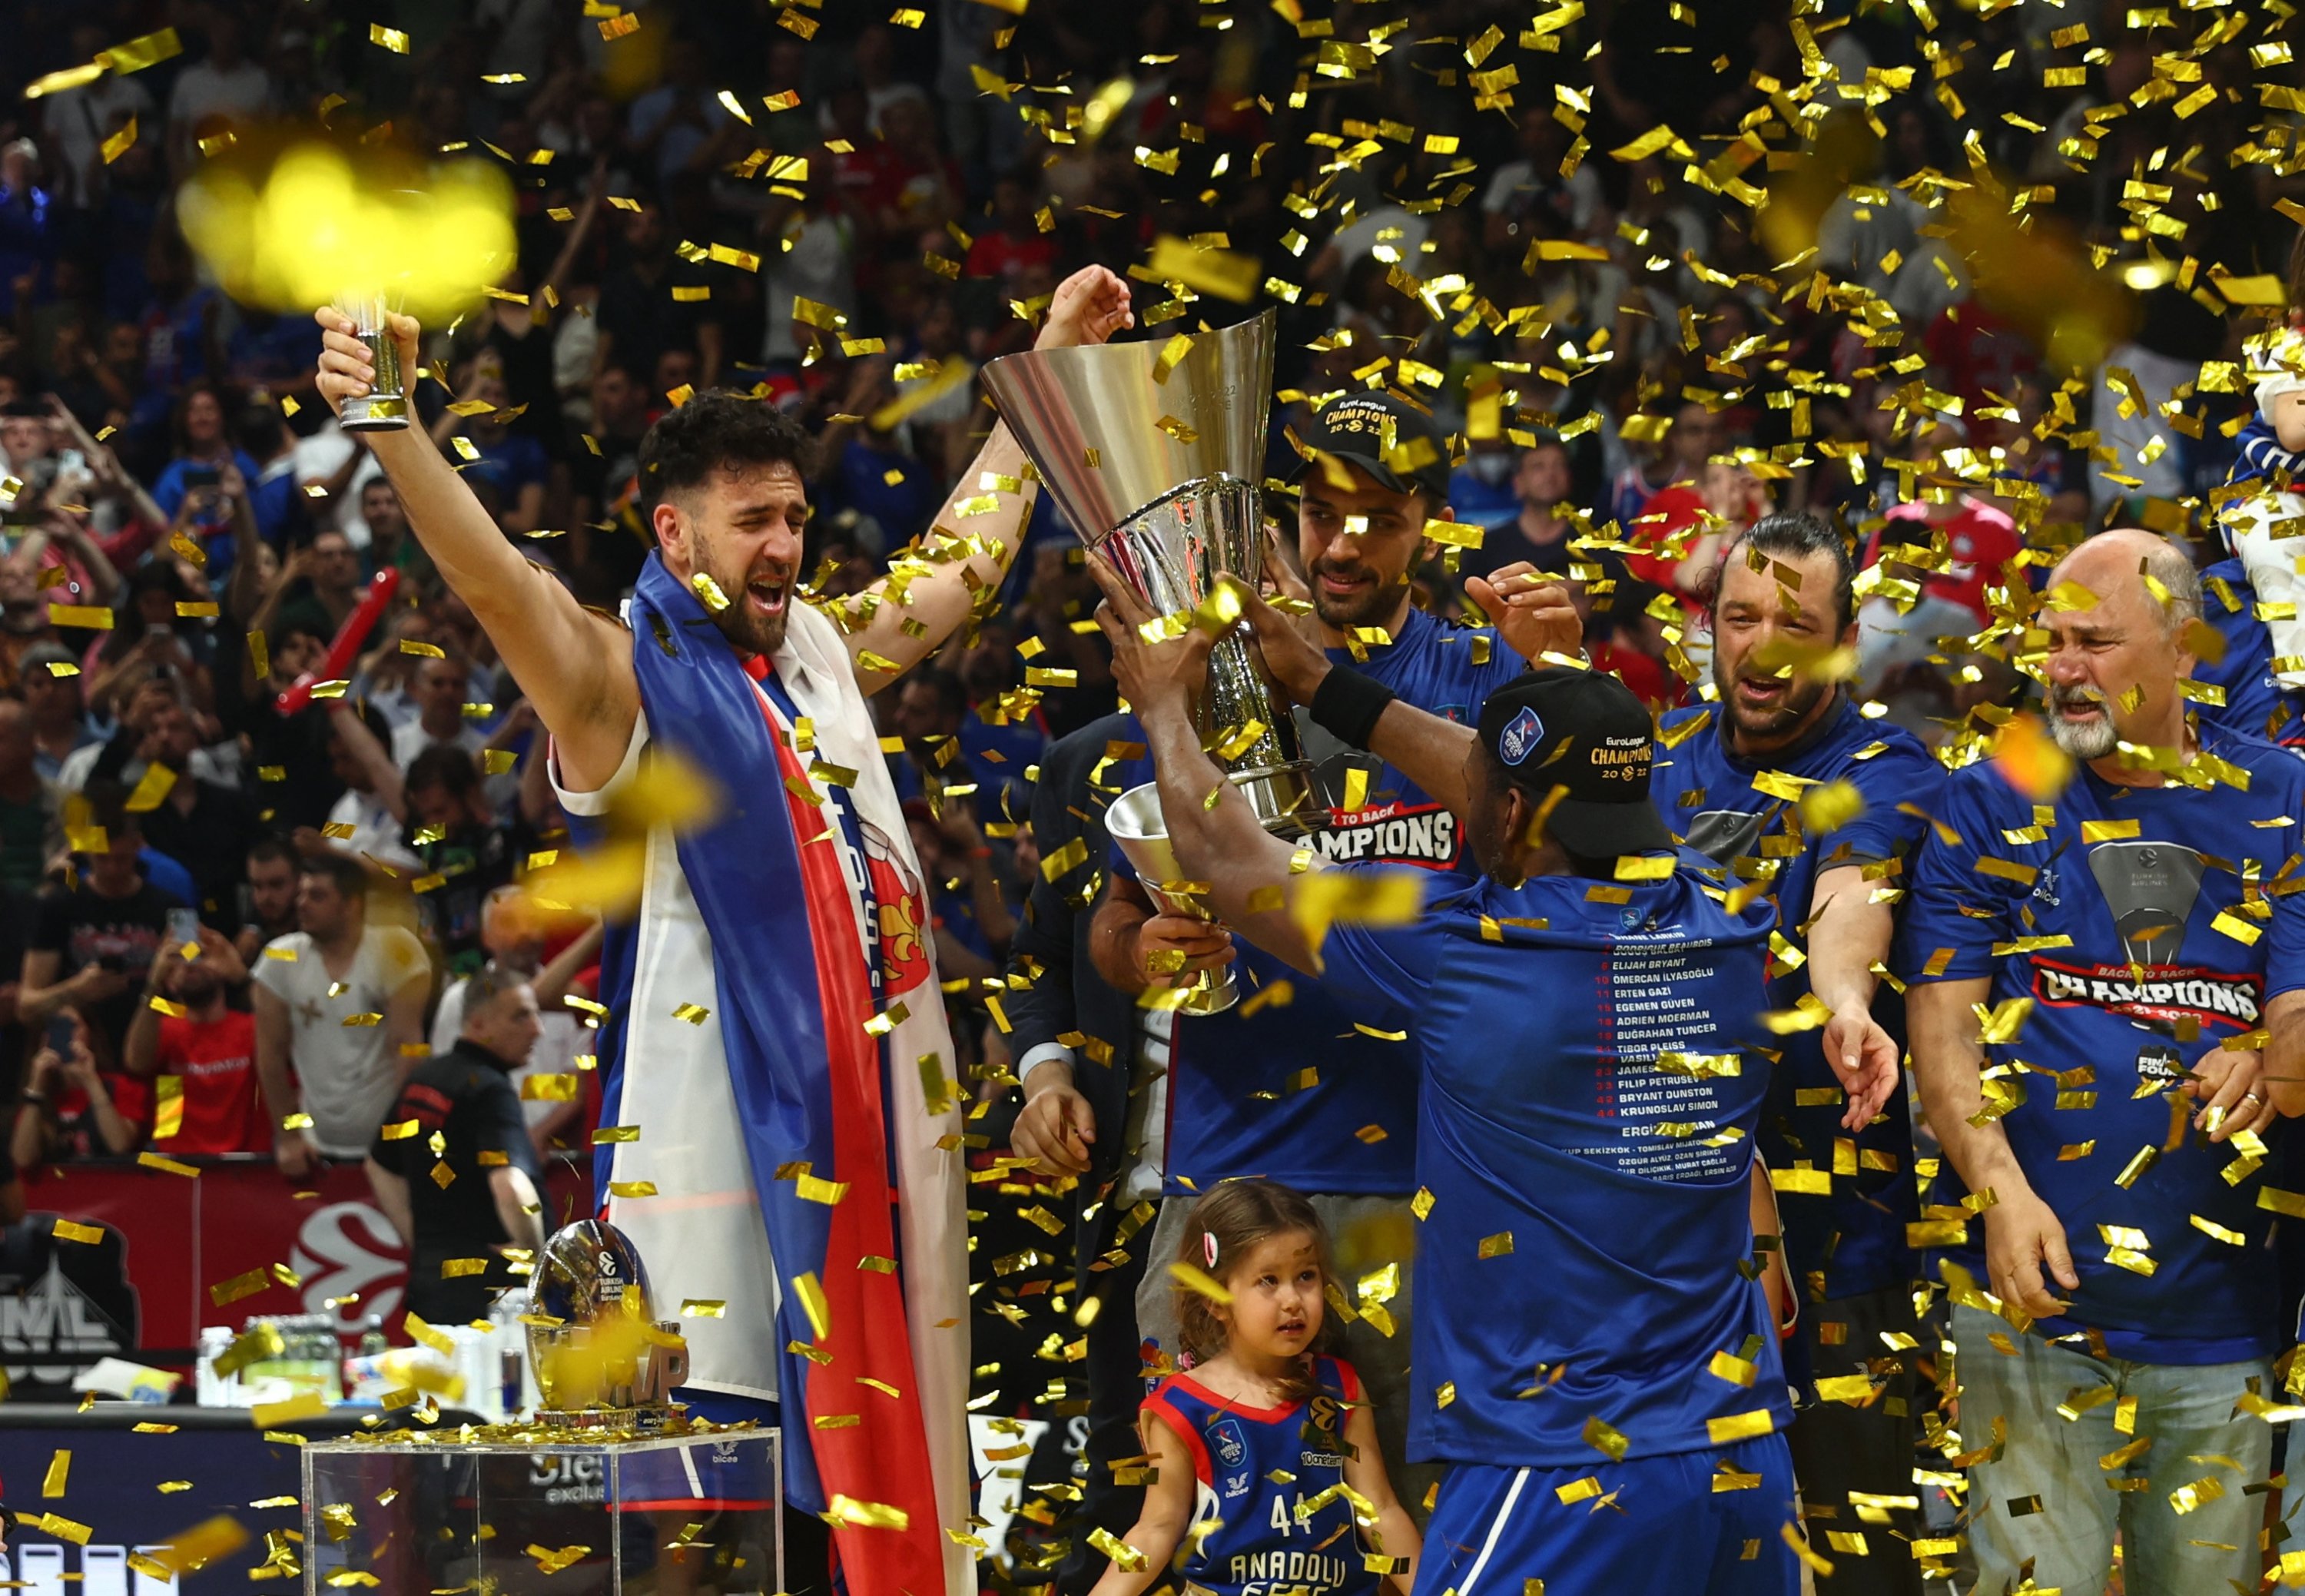 Efes' players celebrate with the trophy after winning the Euroleague final, Belgrade, Serbia, May 21, 2022. (Reuters Photo)